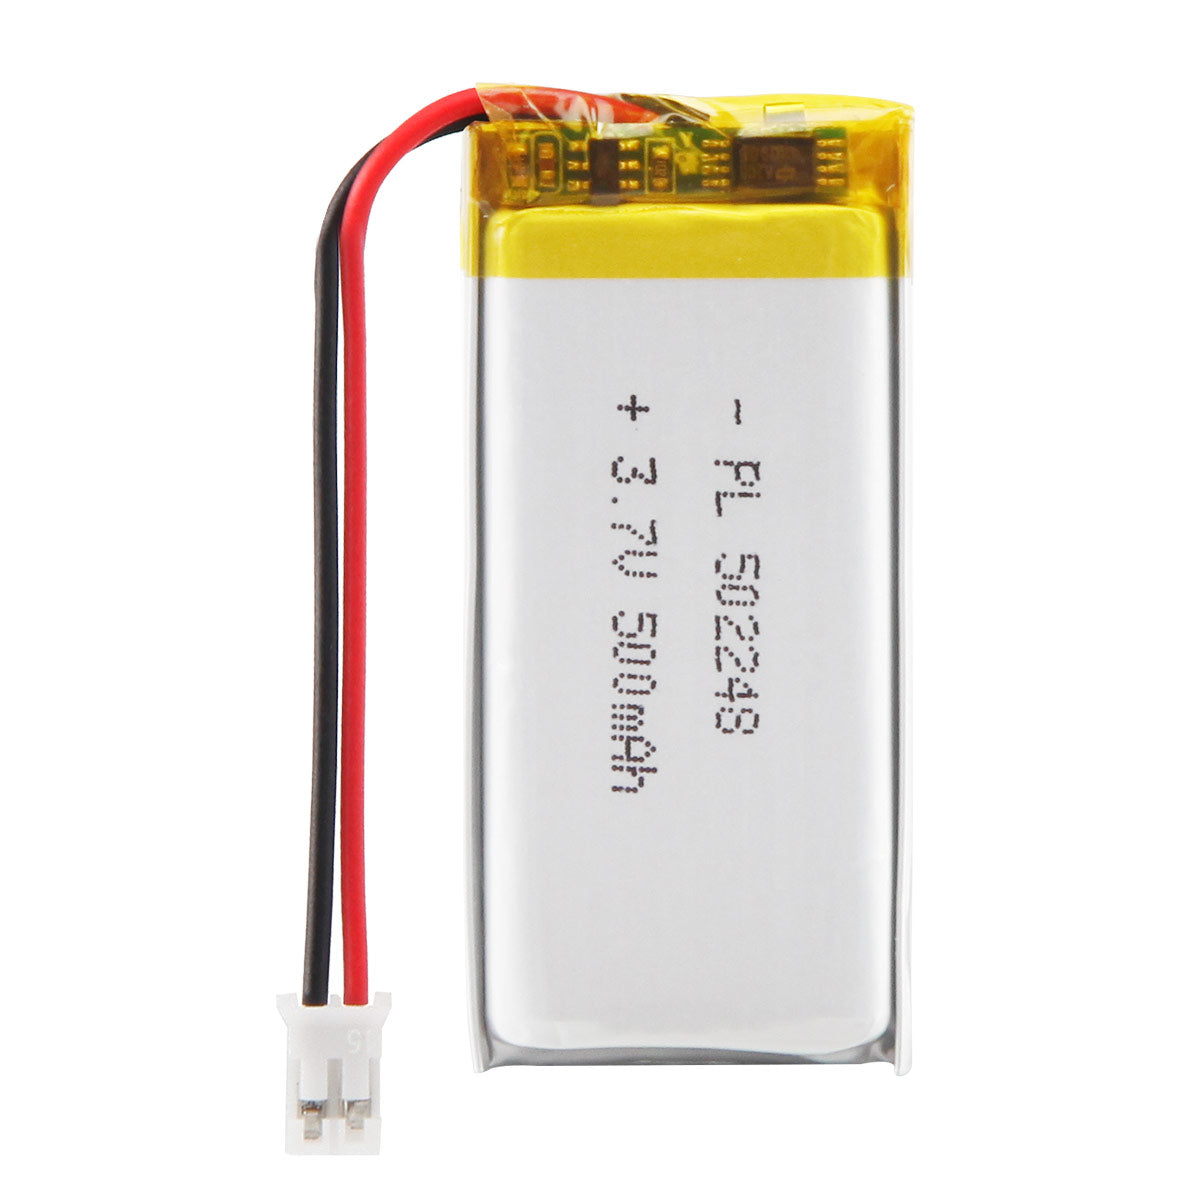 YDL 3.7V 500mAh 502248 Rechargeable Polymer Lithium-Ion Battery Length 50mm